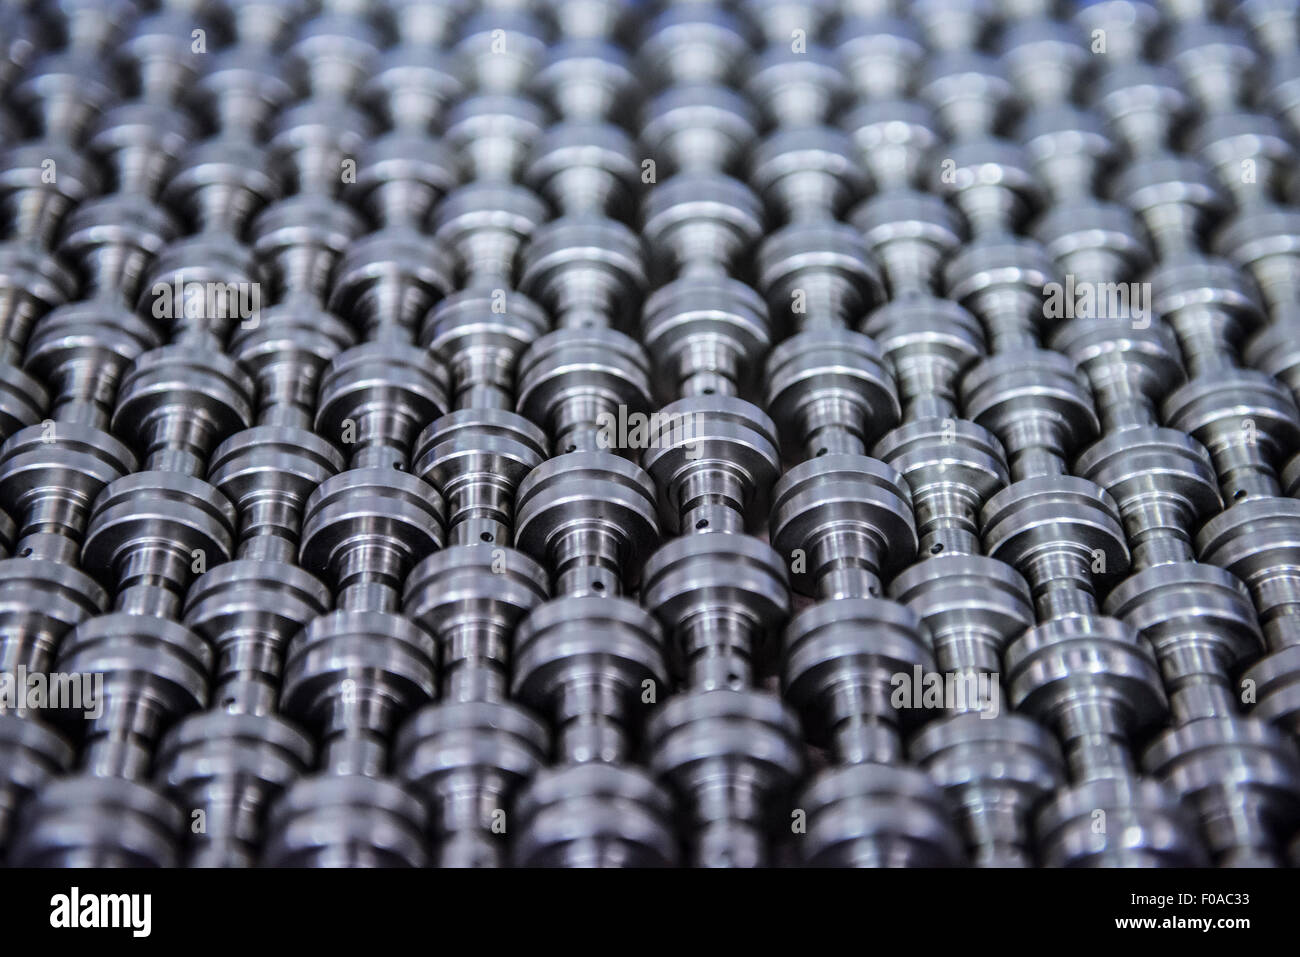 Close up view of engineered parts Stock Photo